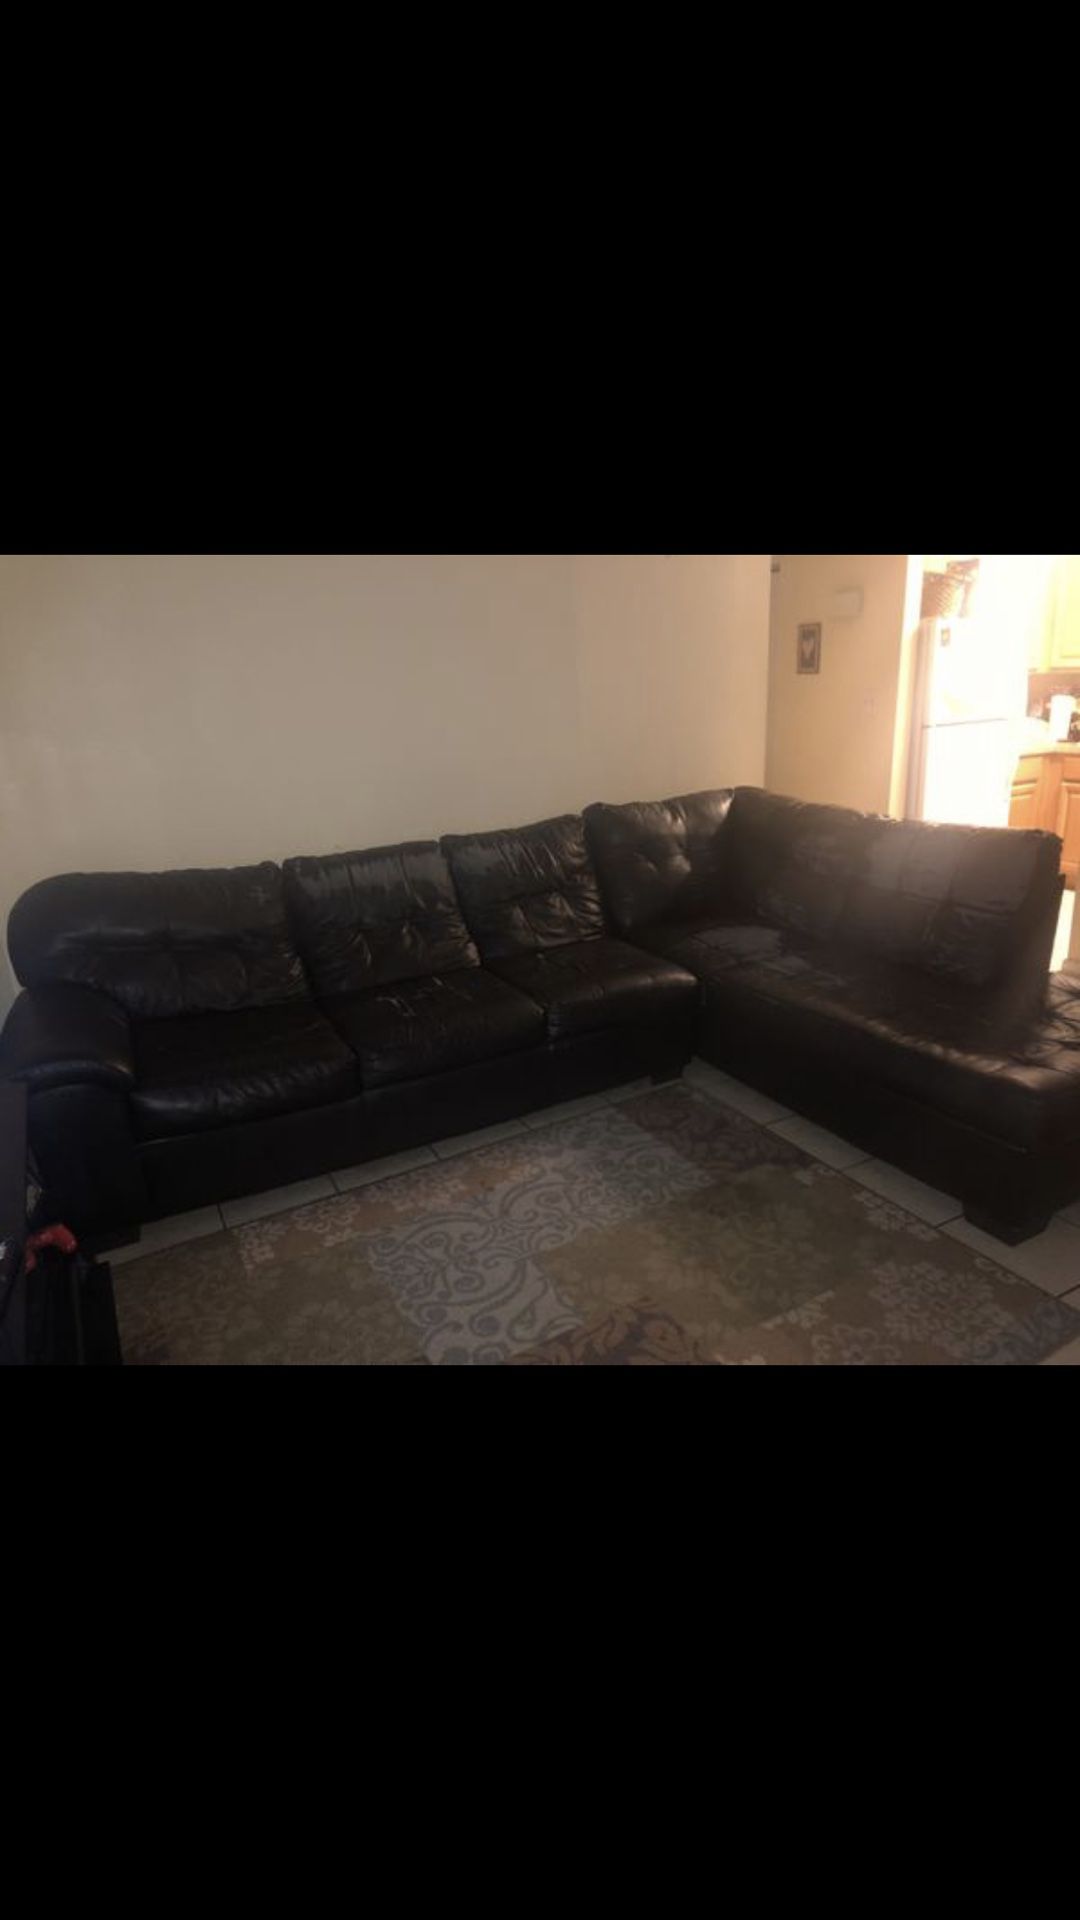 Couch FREE come get today